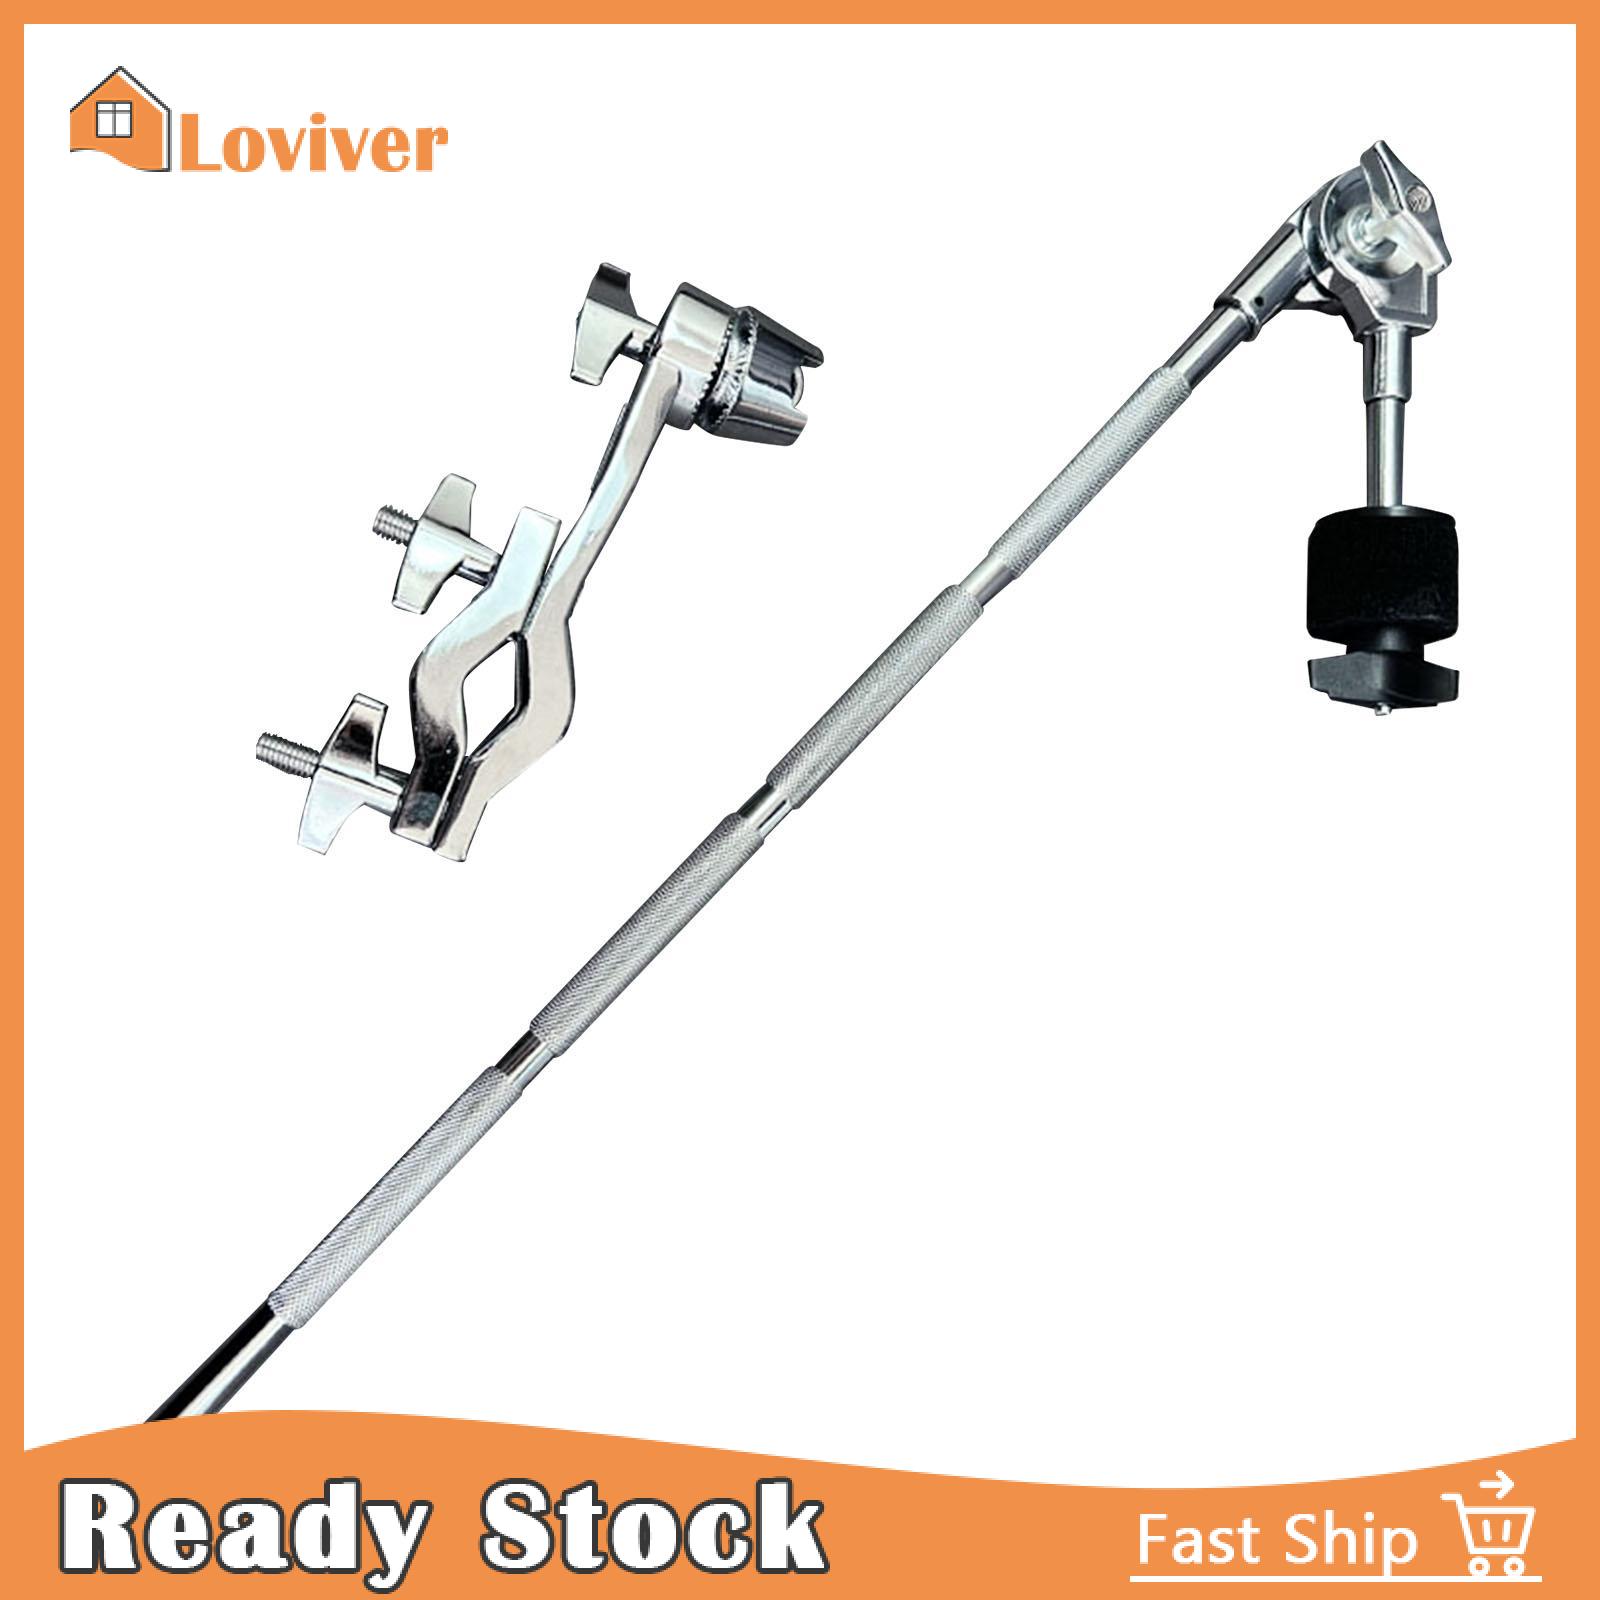 Loviver Cymbal Ratchet Clamp Cymbal Expand Arm Universal Cymbal Stand